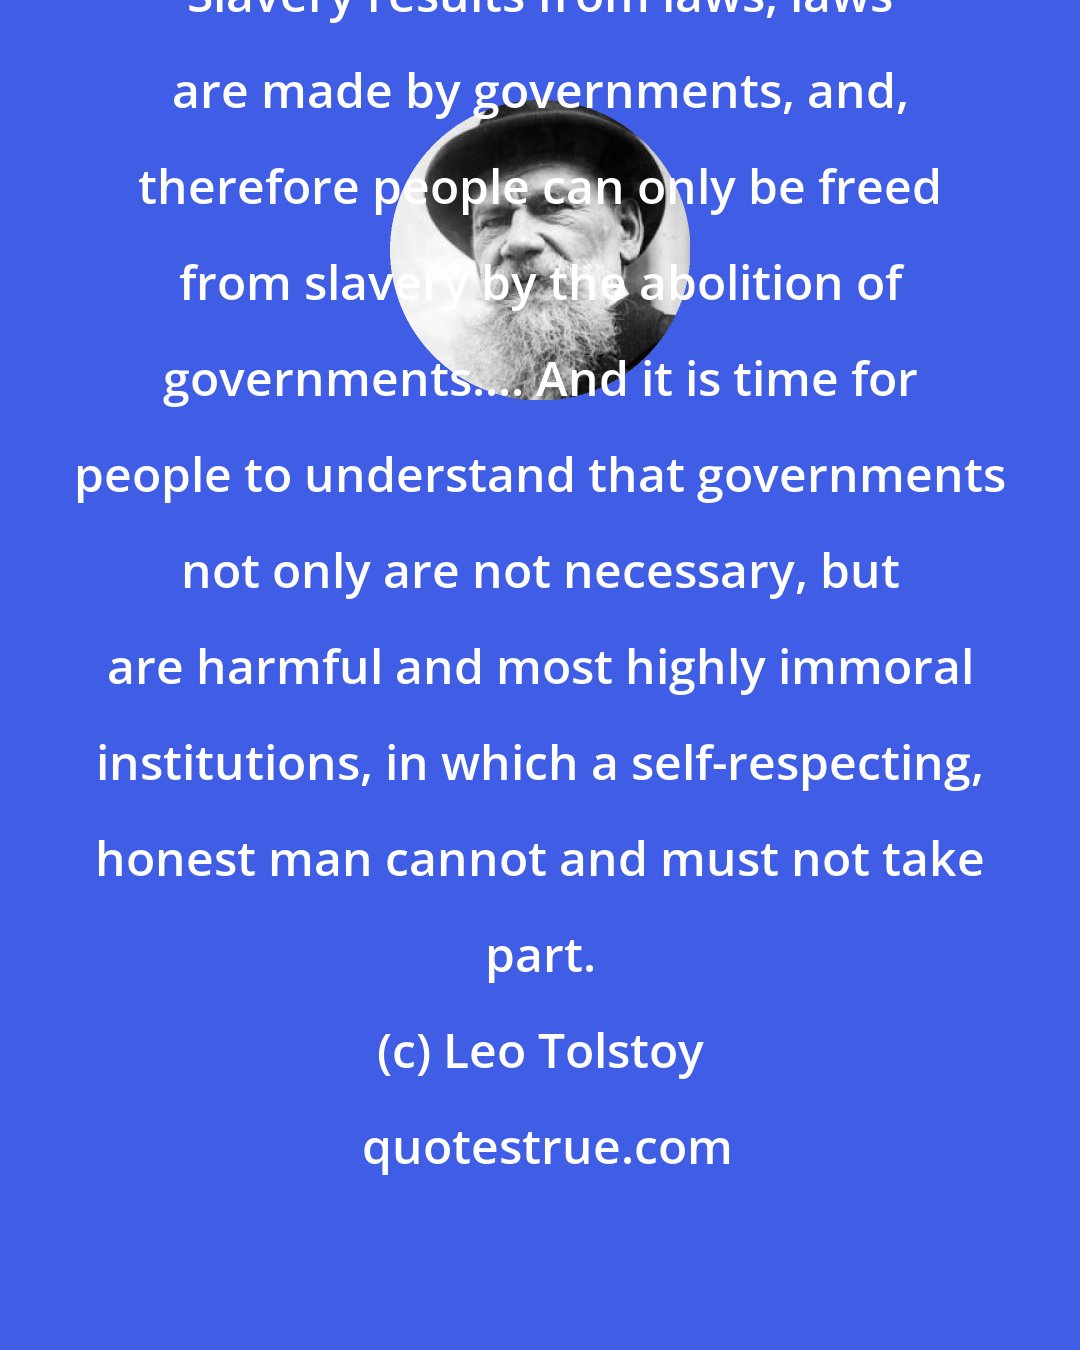 Leo Tolstoy: Slavery results from laws, laws are made by governments, and, therefore people can only be freed from slavery by the abolition of governments.... And it is time for people to understand that governments not only are not necessary, but are harmful and most highly immoral institutions, in which a self-respecting, honest man cannot and must not take part.